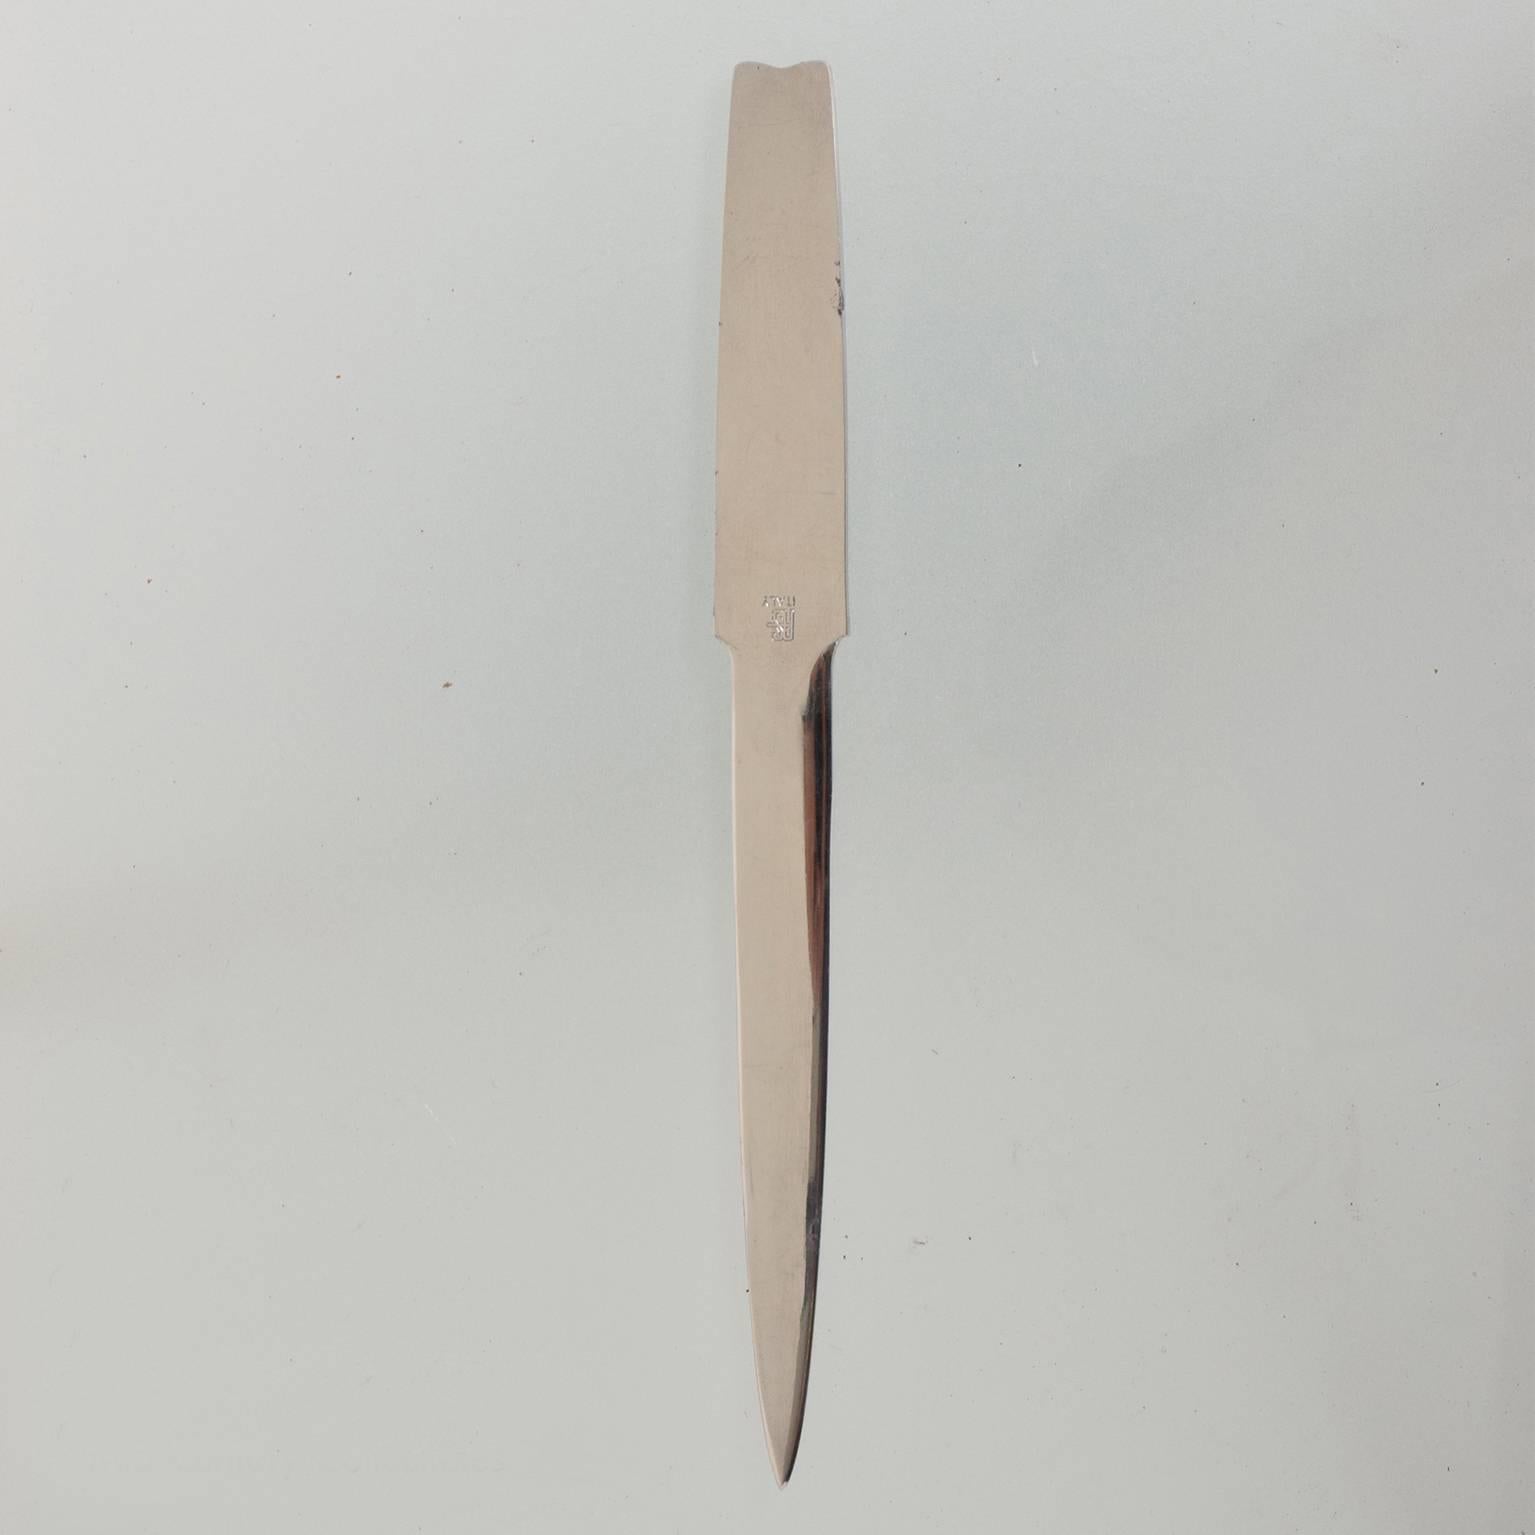 For your consideration, a Mid-Century Modern desk accessory letter opener brass plated as Italy.
Italy, circa the 1970s.
Dimensions: 7 3/8